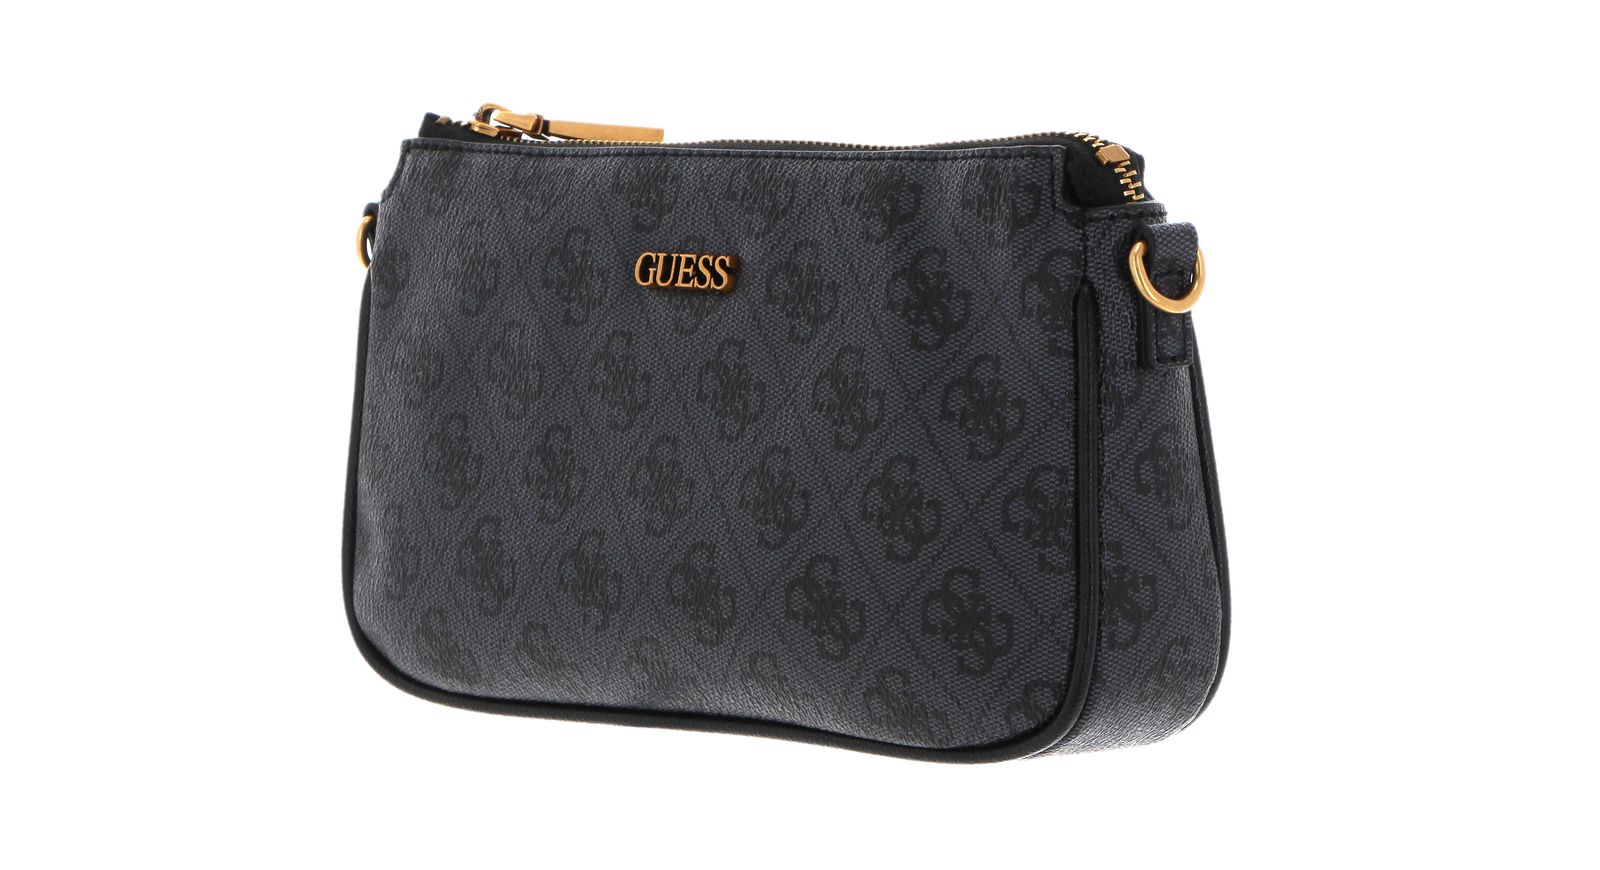 Guess Nell Mini Double Pouch Bag Brown